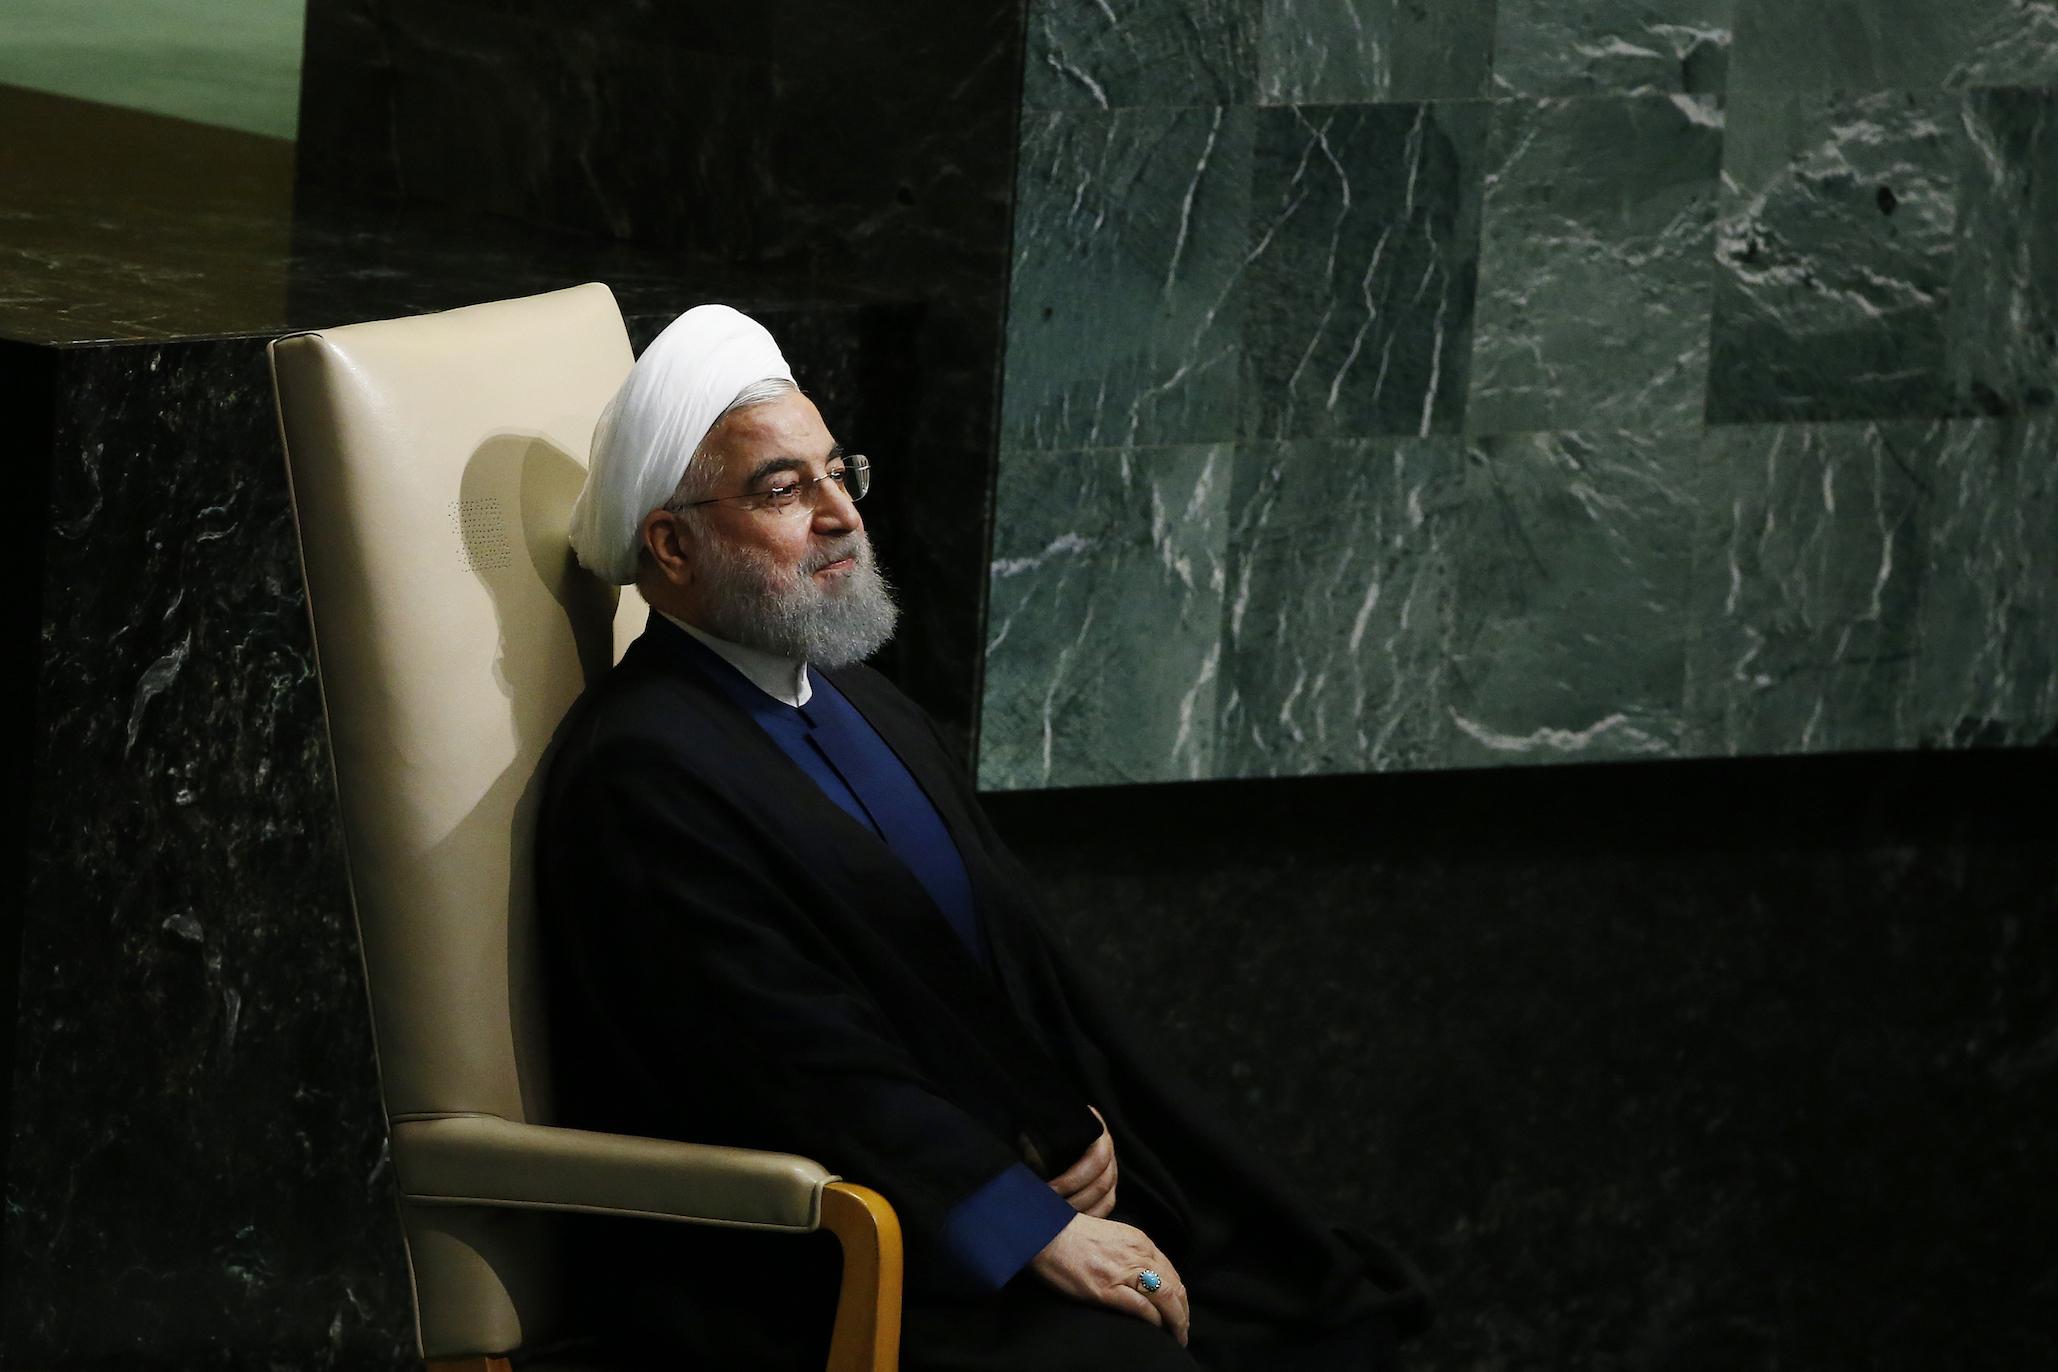 Iranian President Hassan Rouhani sits before addressing the United Nations General Assembly at UN headquarters